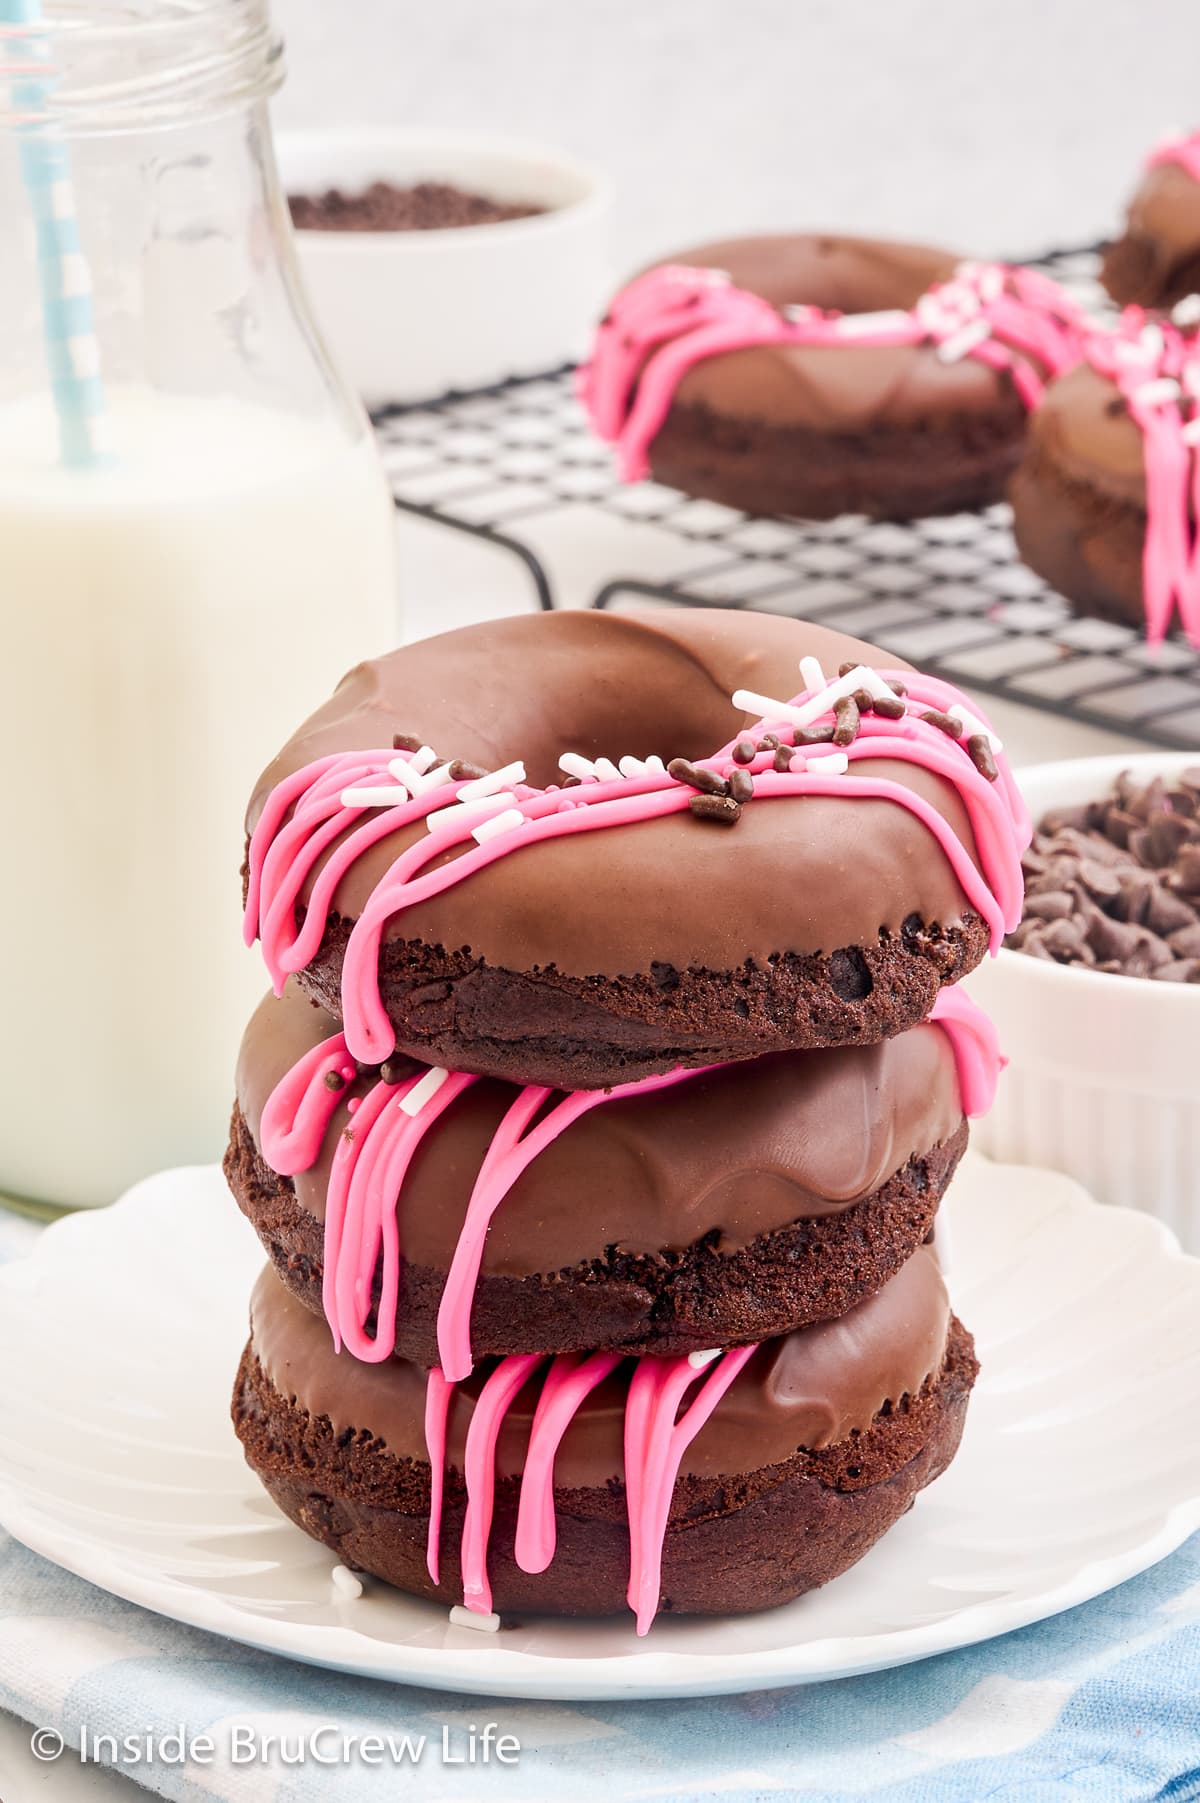 A stack of three chocolate donuts with chocolate and sprinkles on top.